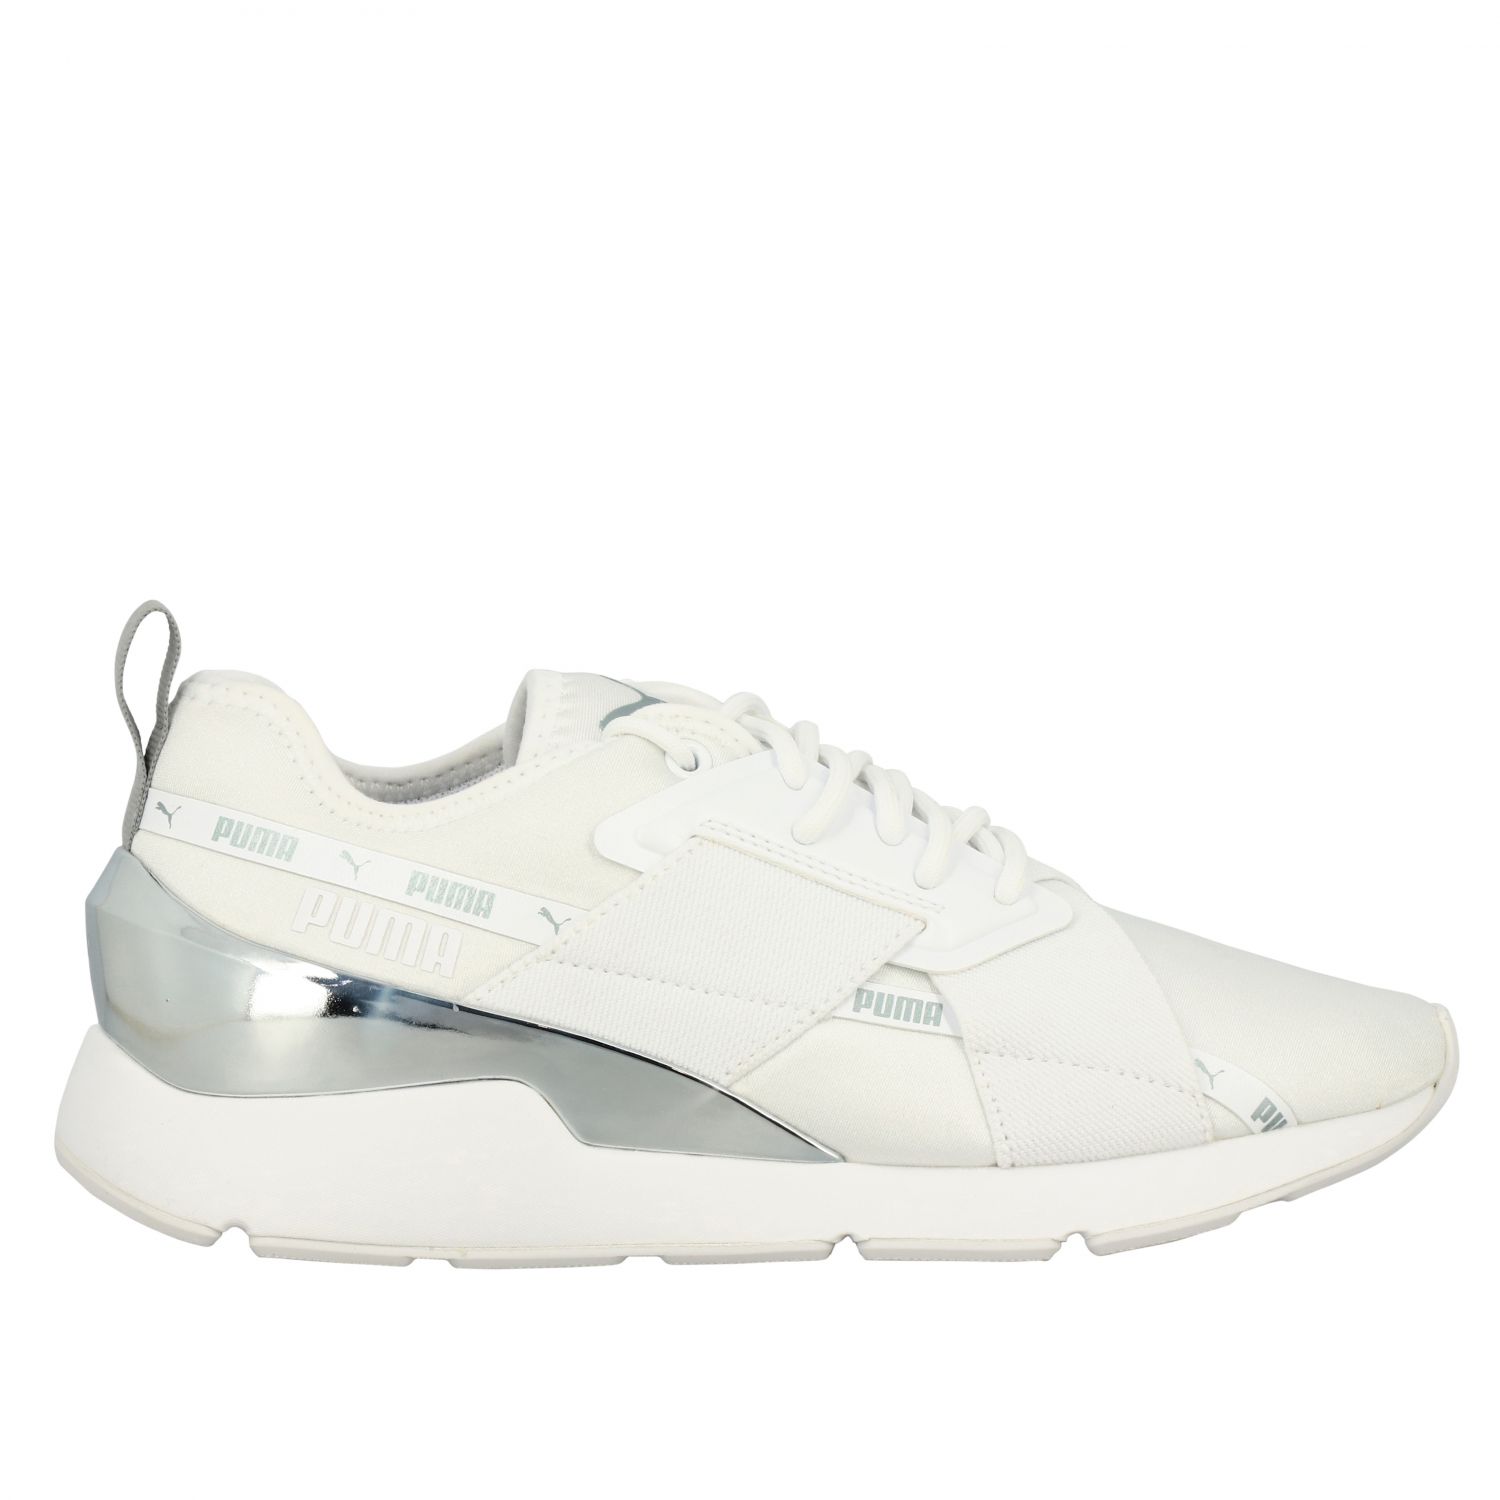 Puma Outlet: sneakers for woman - White | Puma sneakers 370838 online ...